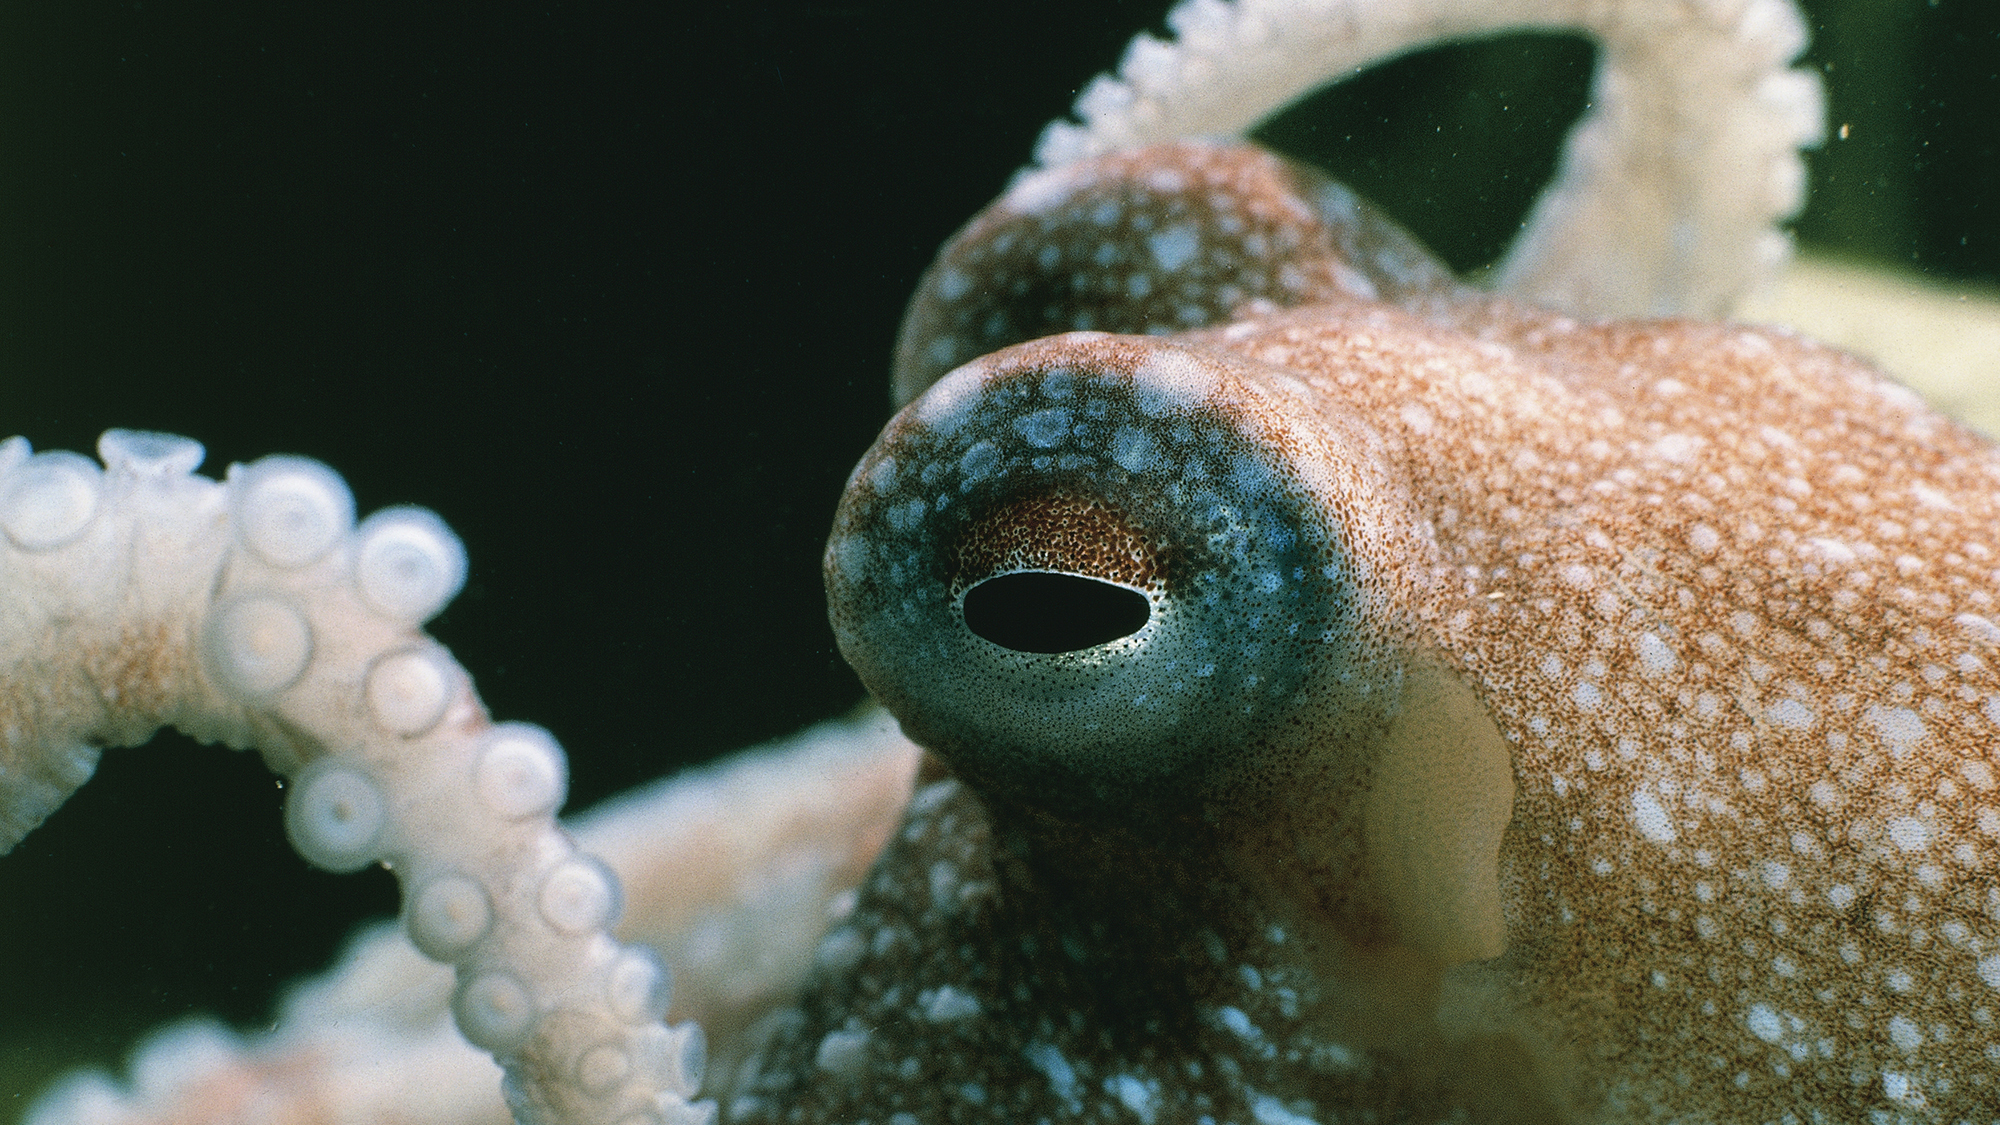 Why counting octopus “rings” is so important